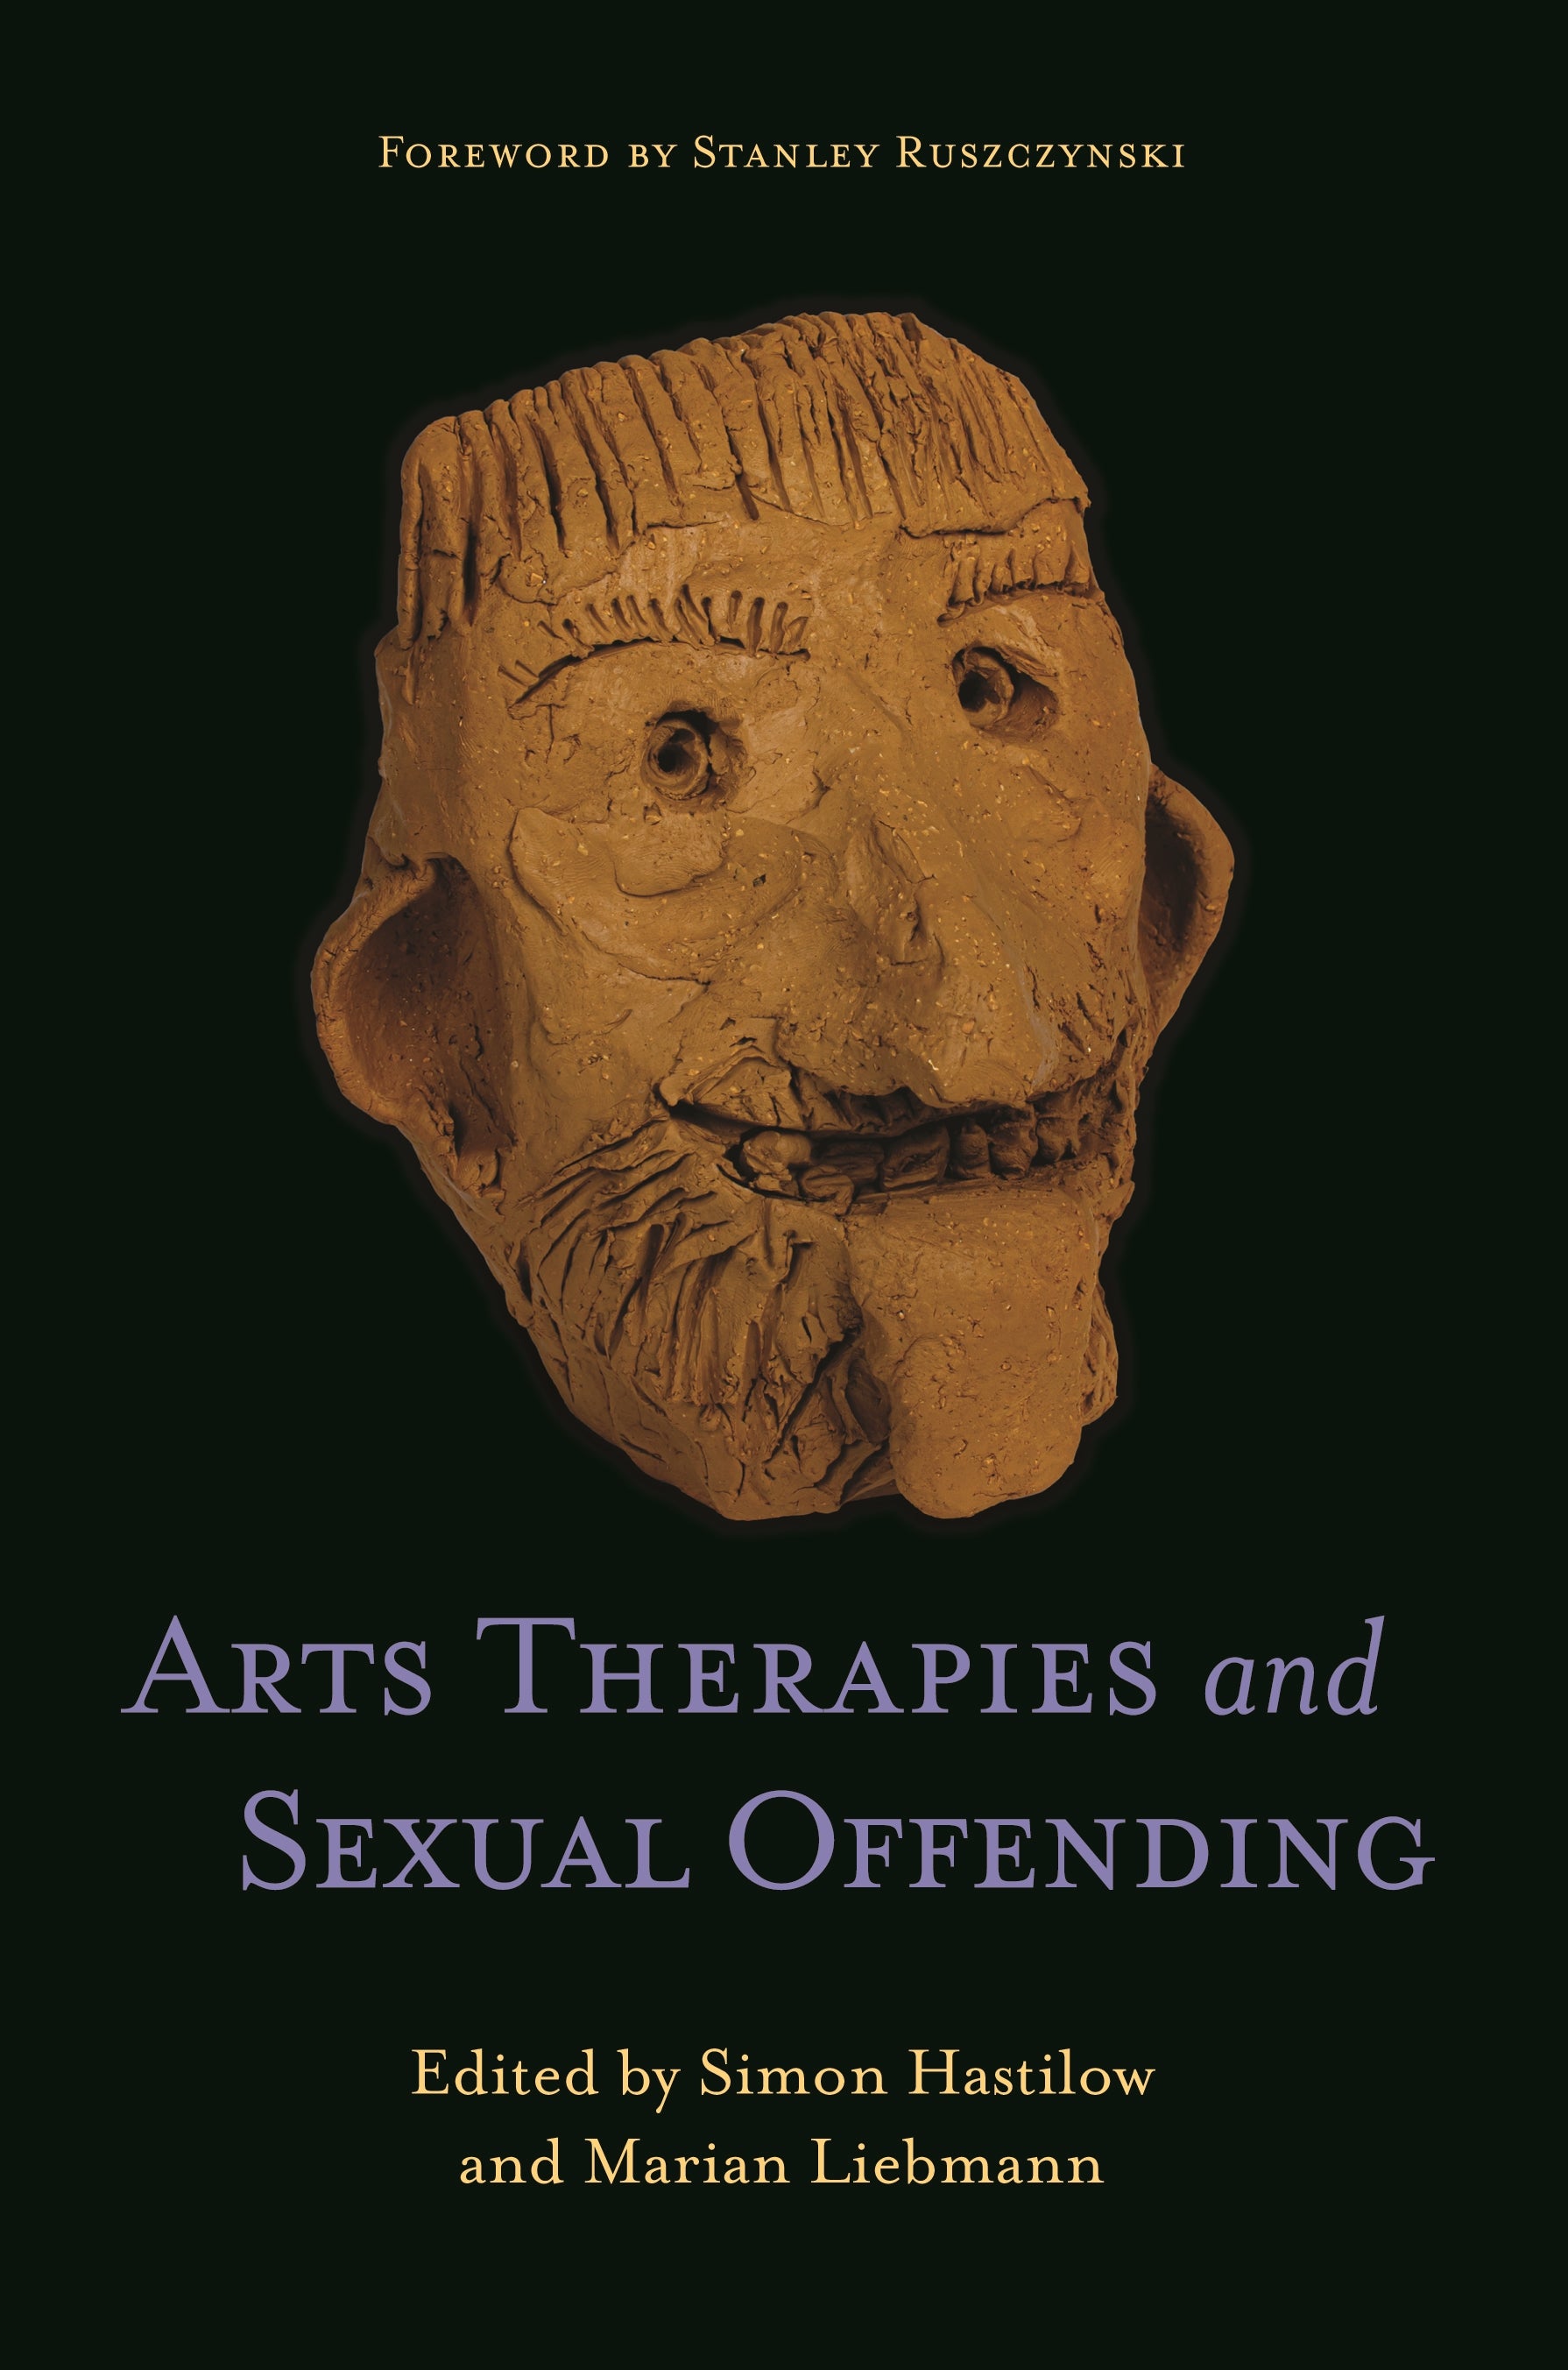 Arts Therapies and Sexual Offending by Simon Hastilow, Marian Liebmann, Stanley Ruszczynski, No Author Listed